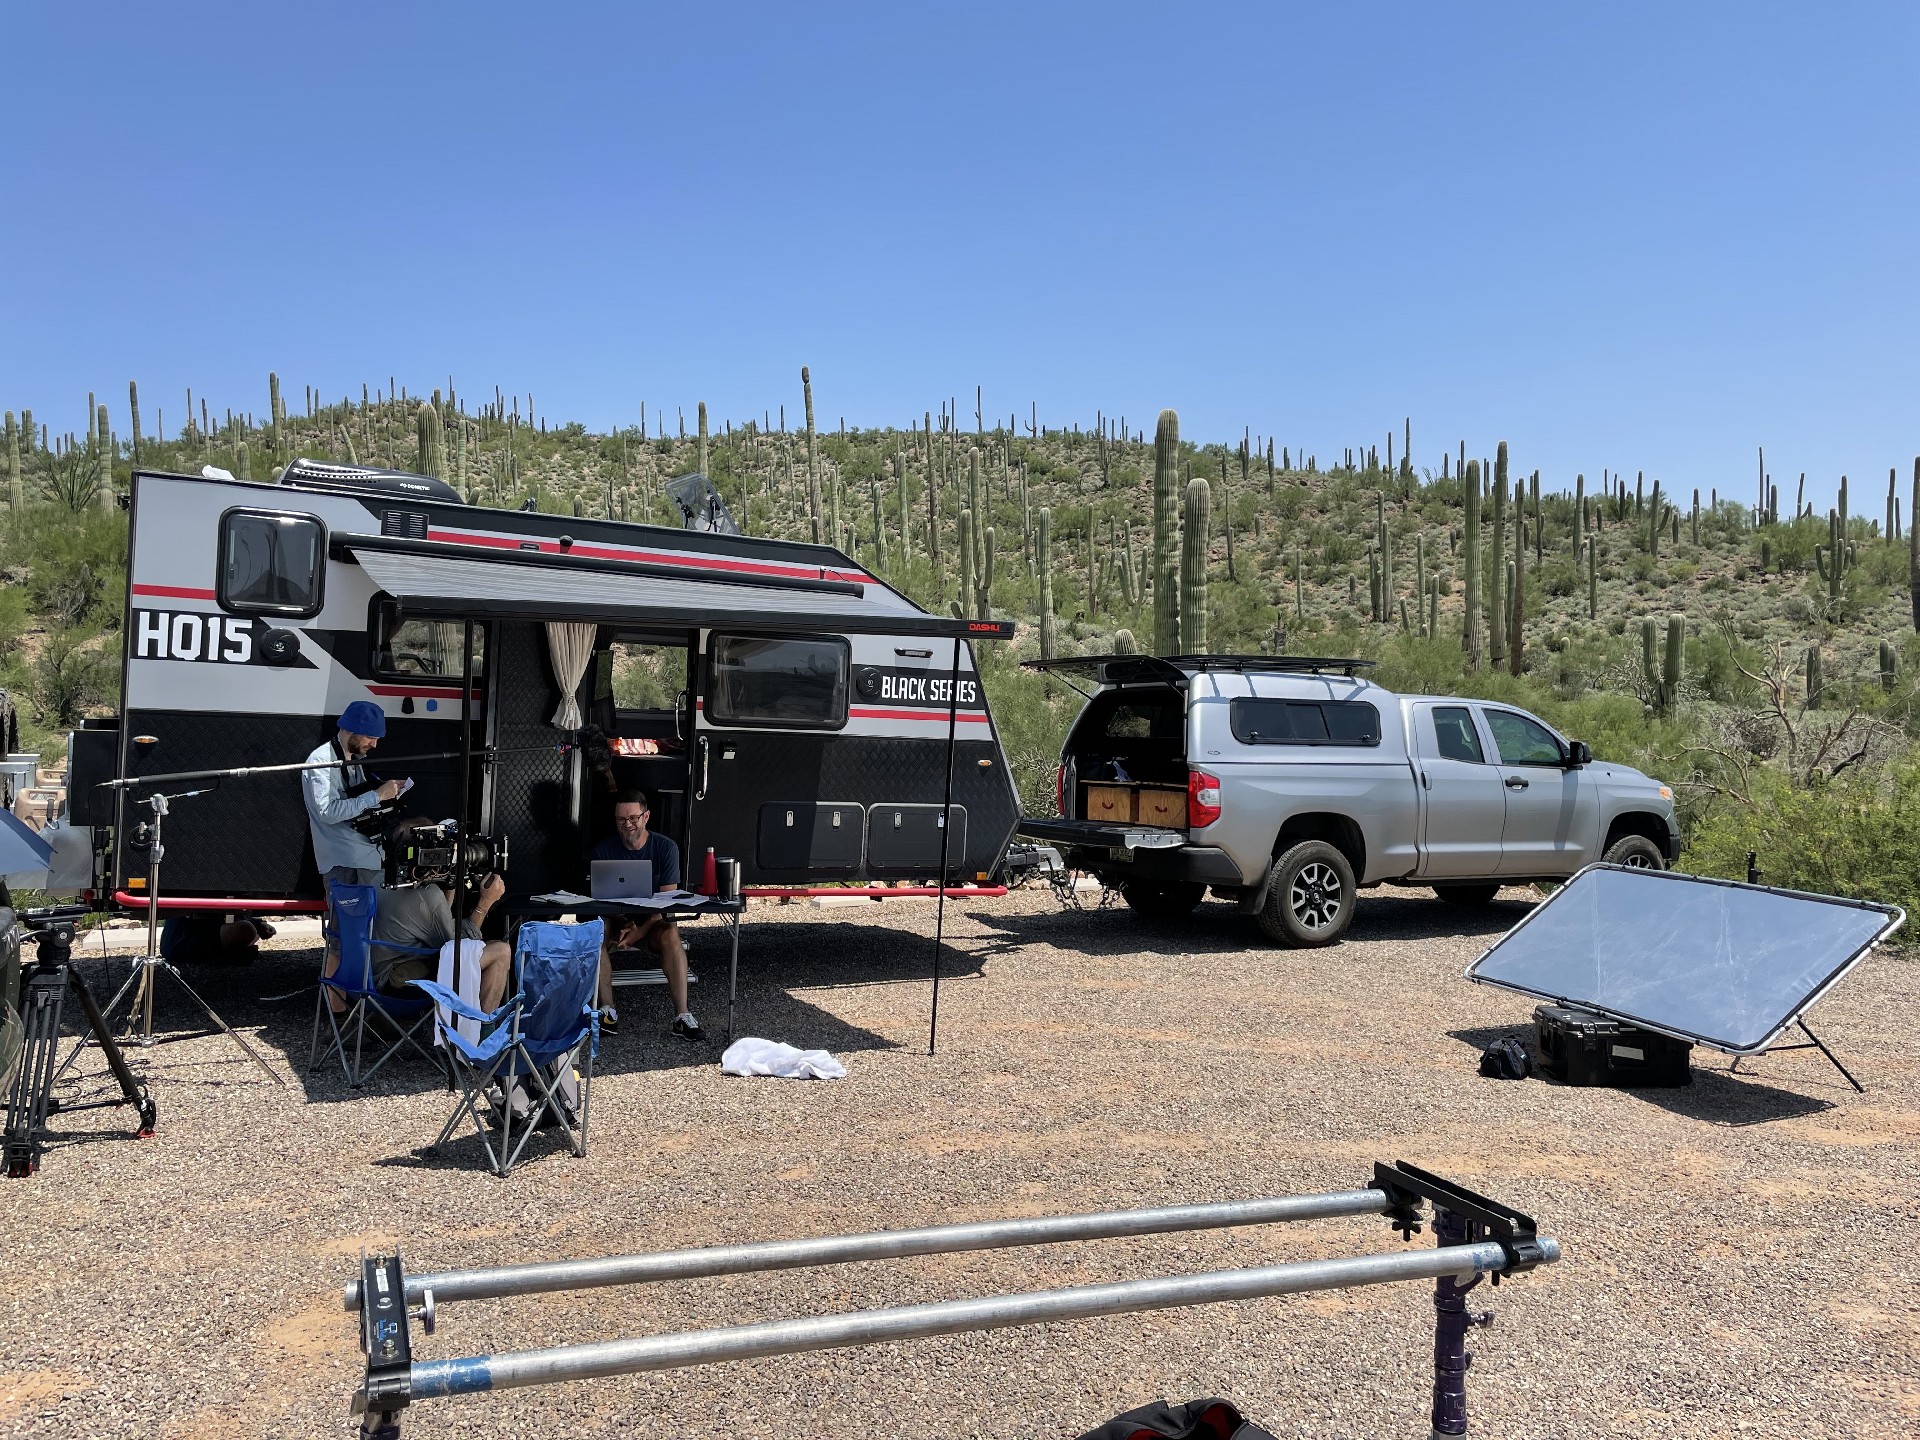 Adventure Filmmaker, Harlan Taney, Turned the HQ15  Into a Mobile Basecamp for Filming On Location